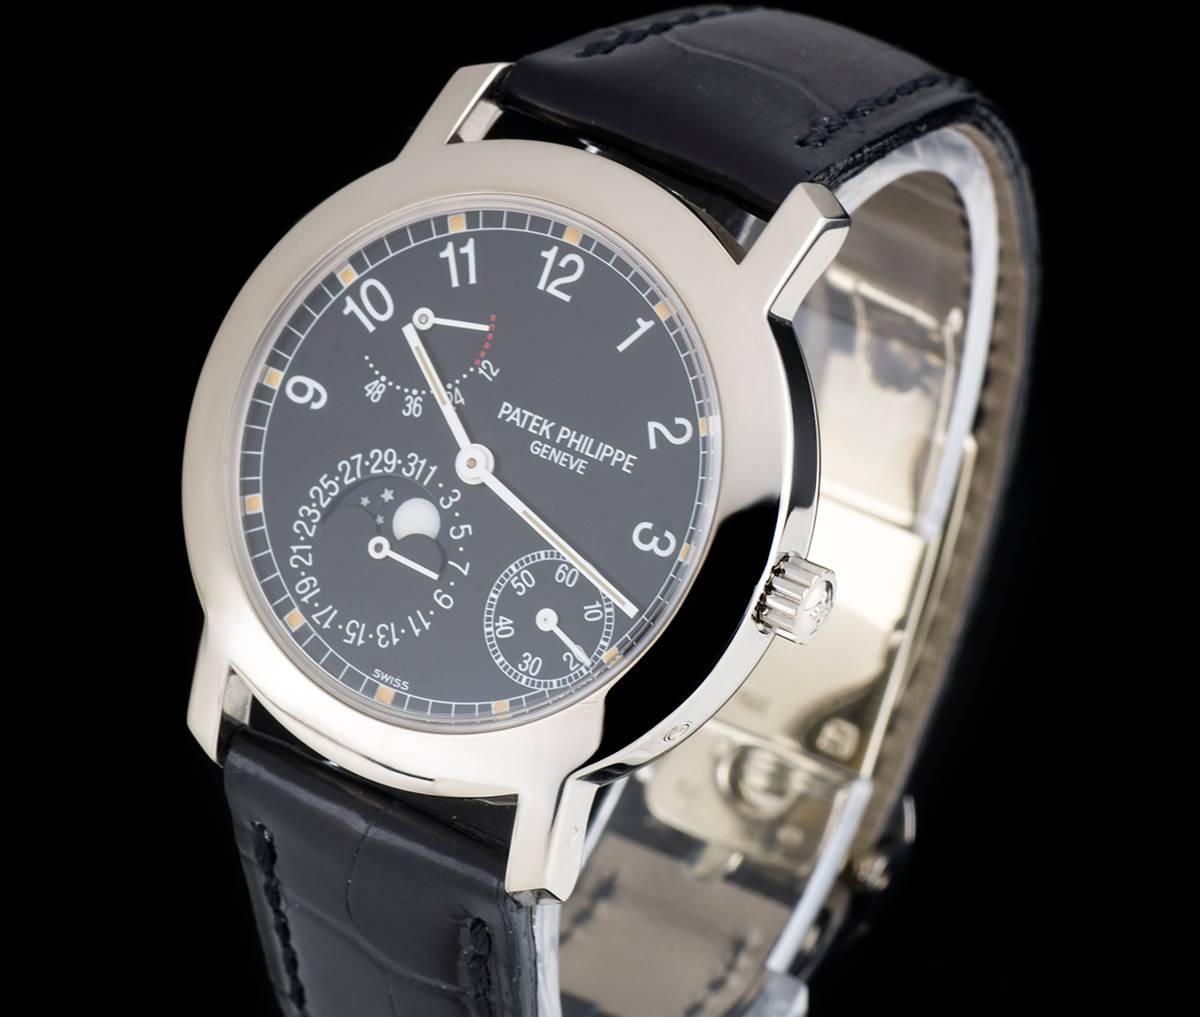 An 18k White Gold Moonphase Power Reserve Gents Wristwatch, black dial with arabic numbers, small seconds between 4 and 5 0'clock, date sub-dial with moonphase aperture at 7 0'clock, power reserve indicator between 10 and 11 0'clock, a fixed 18k